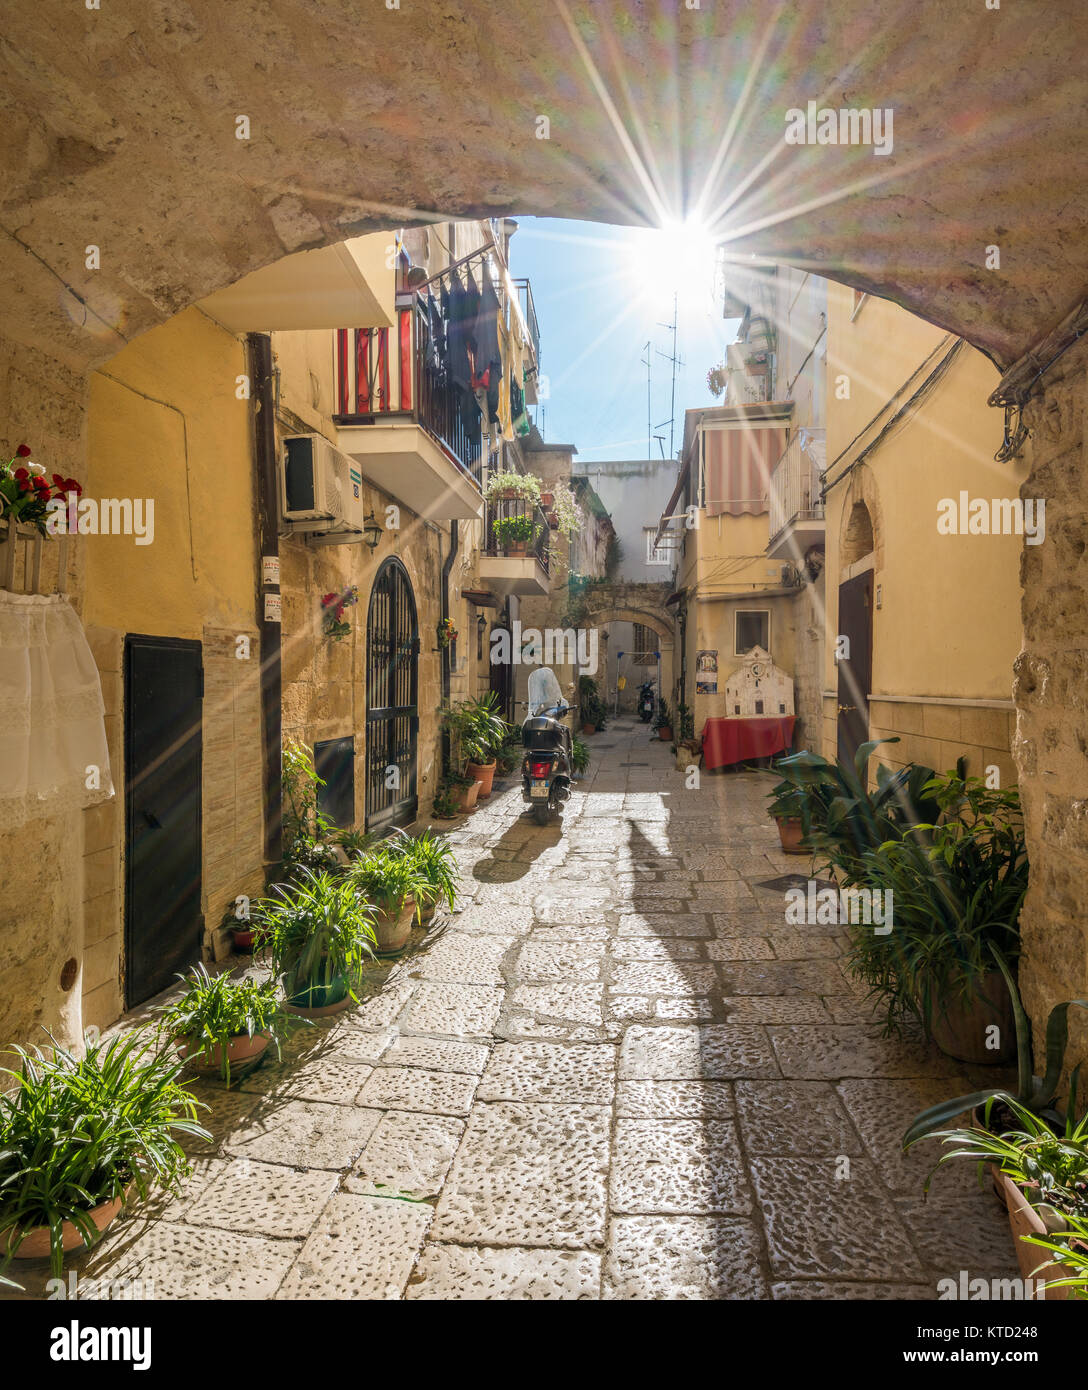 Old town in Bari, Apulia, southern Italy. Stock Photo